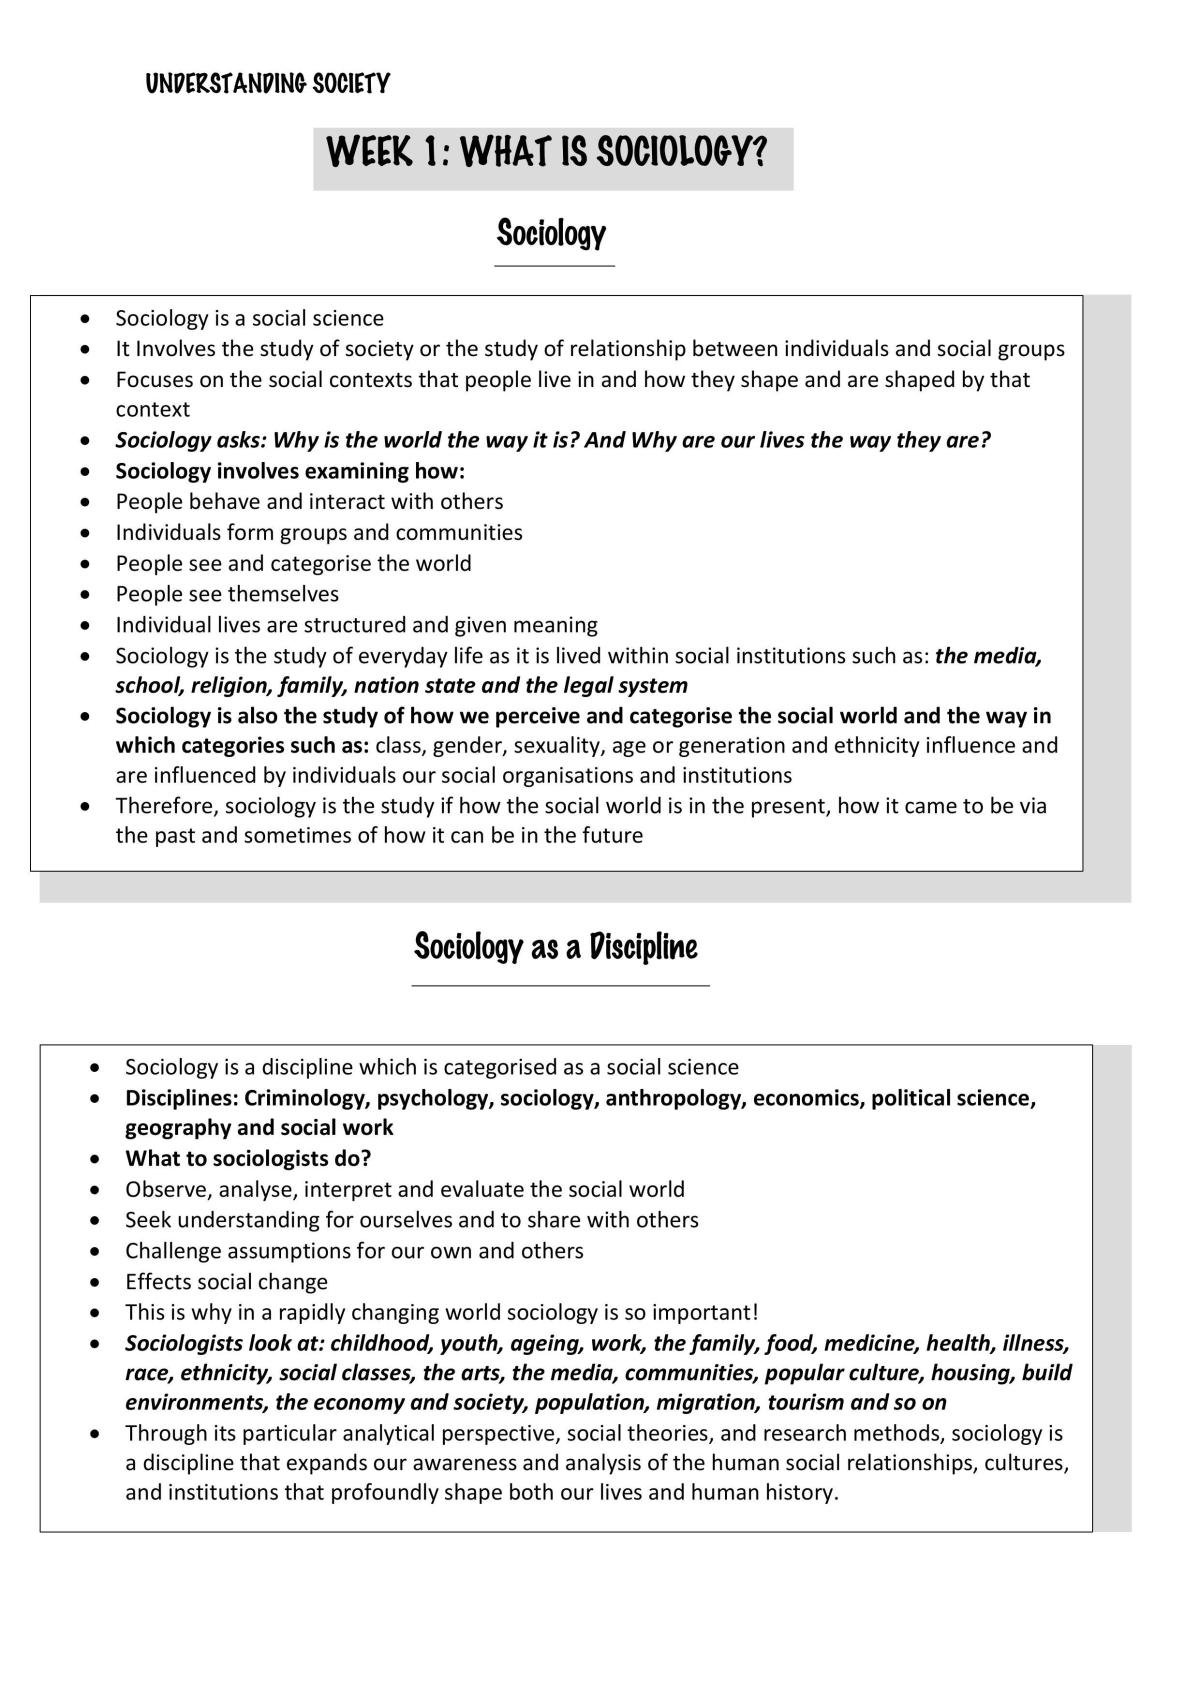 Understanding society notes - Page 1